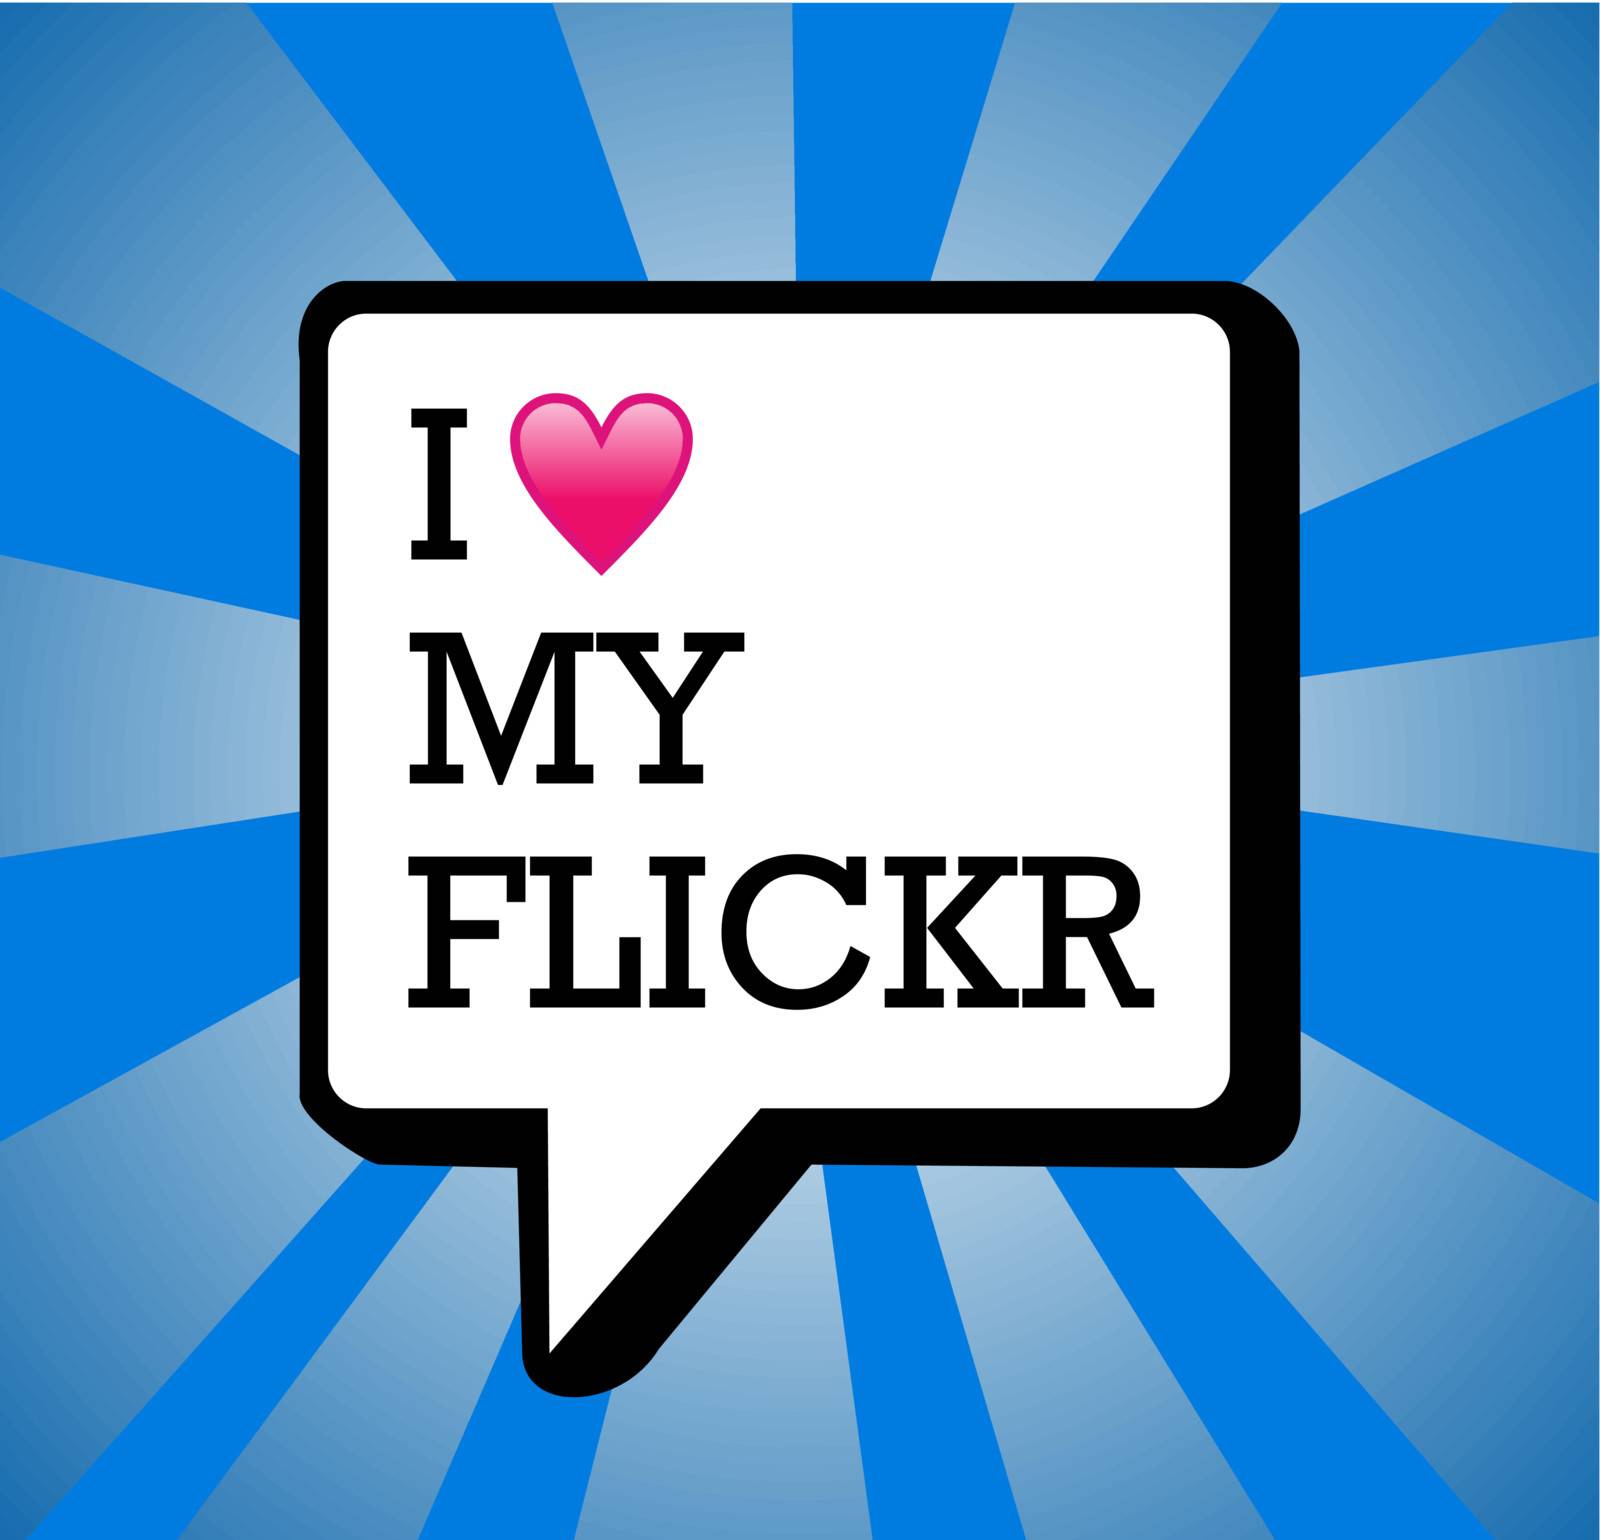 I love my flickr background illustration by cienpies